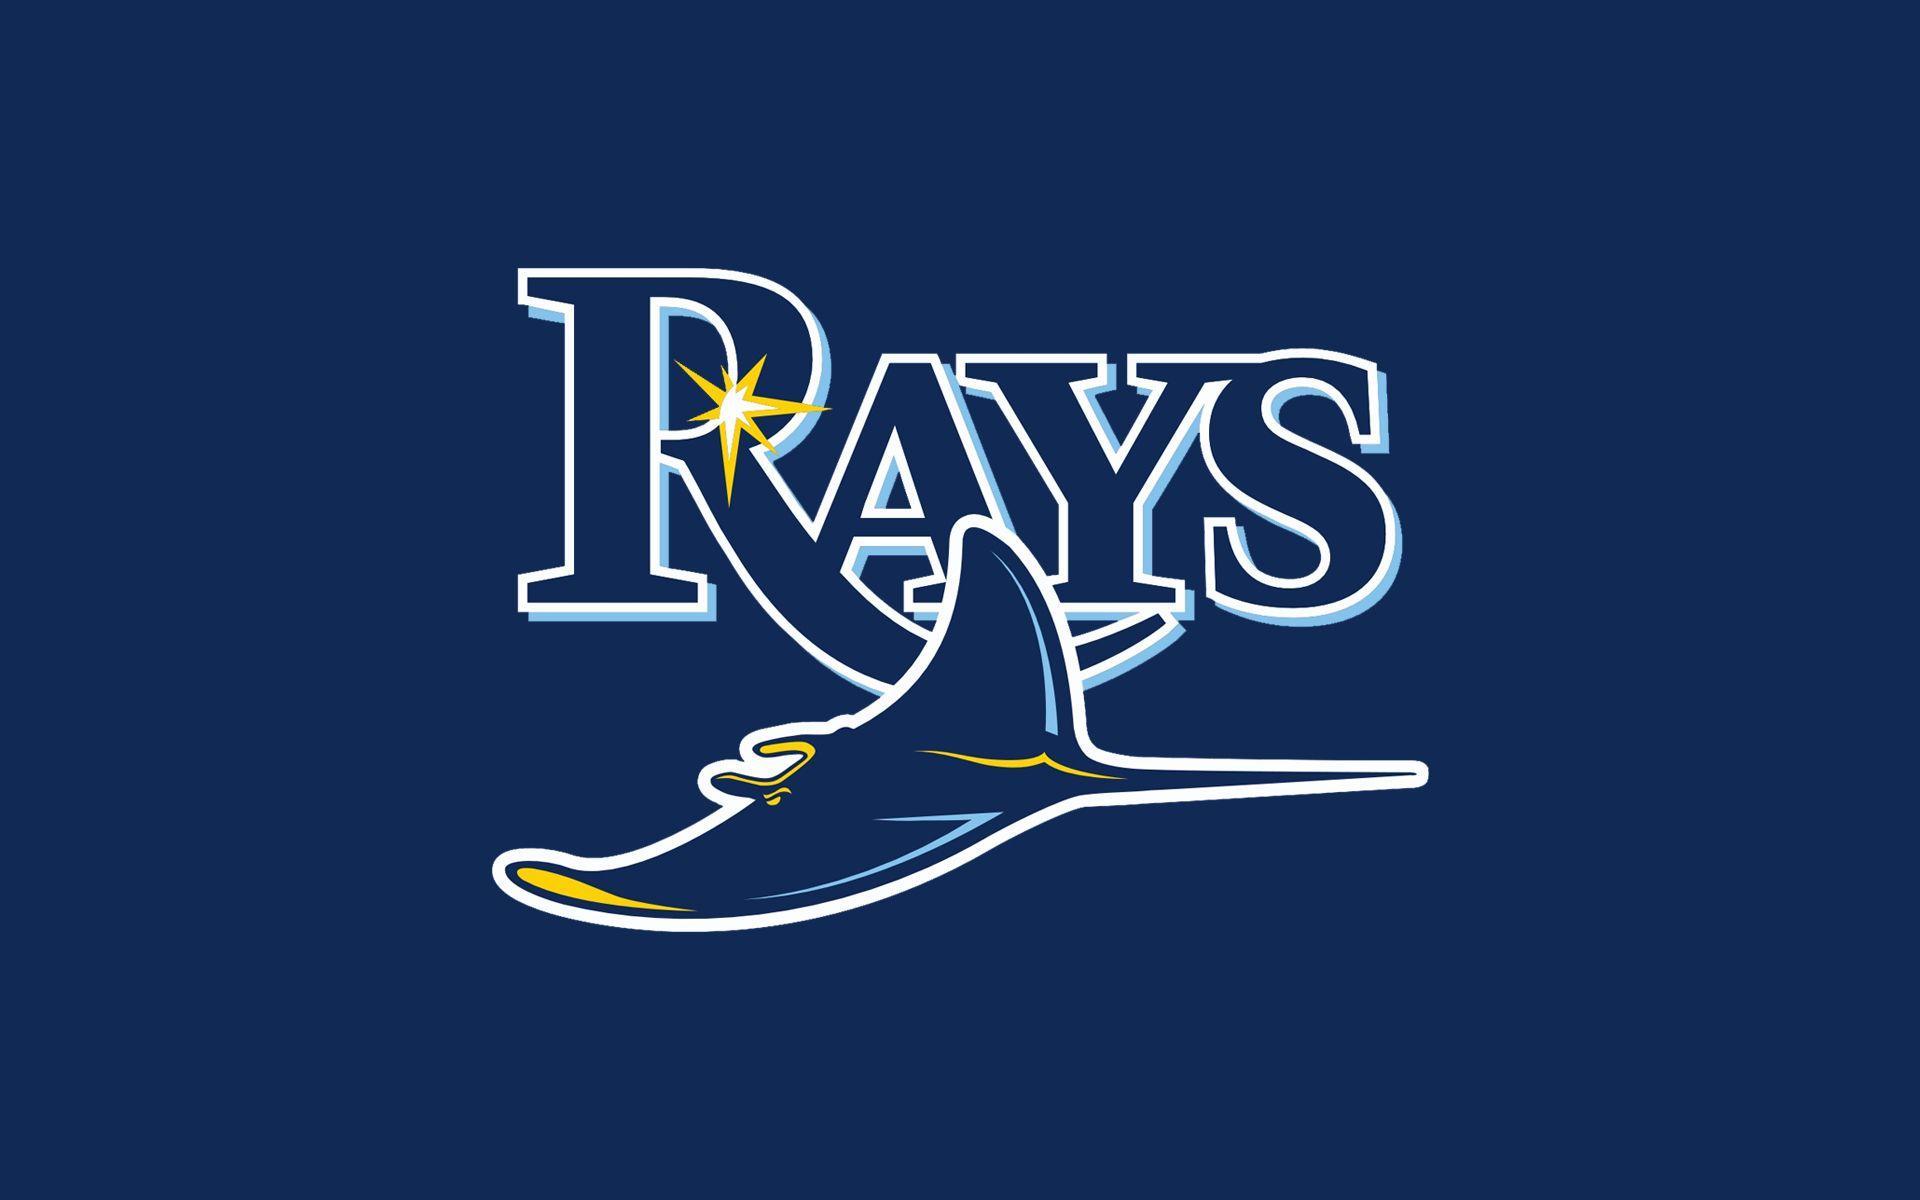 Tampa Bay Rays Wallpaper Image Photo Picture Background